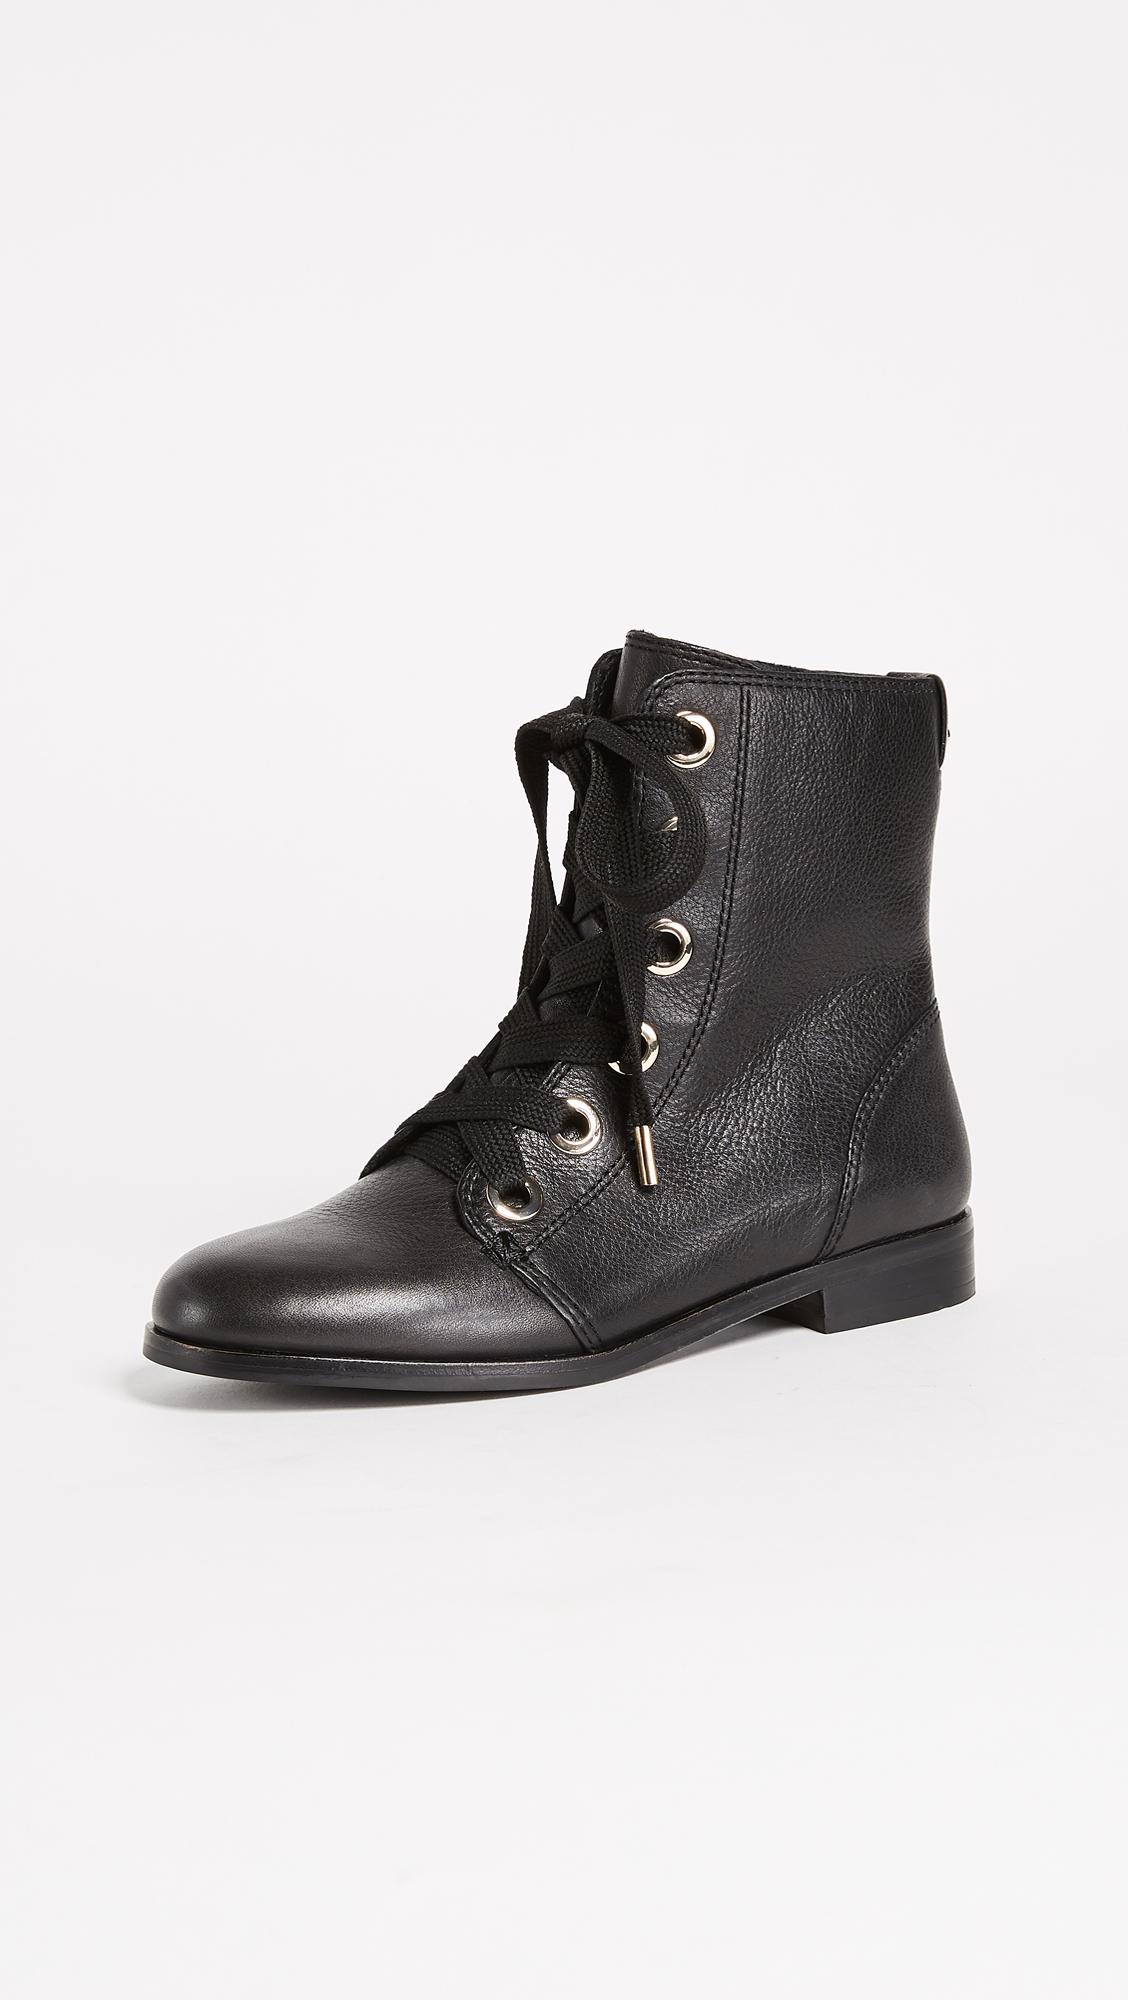 kate spade lace up boots